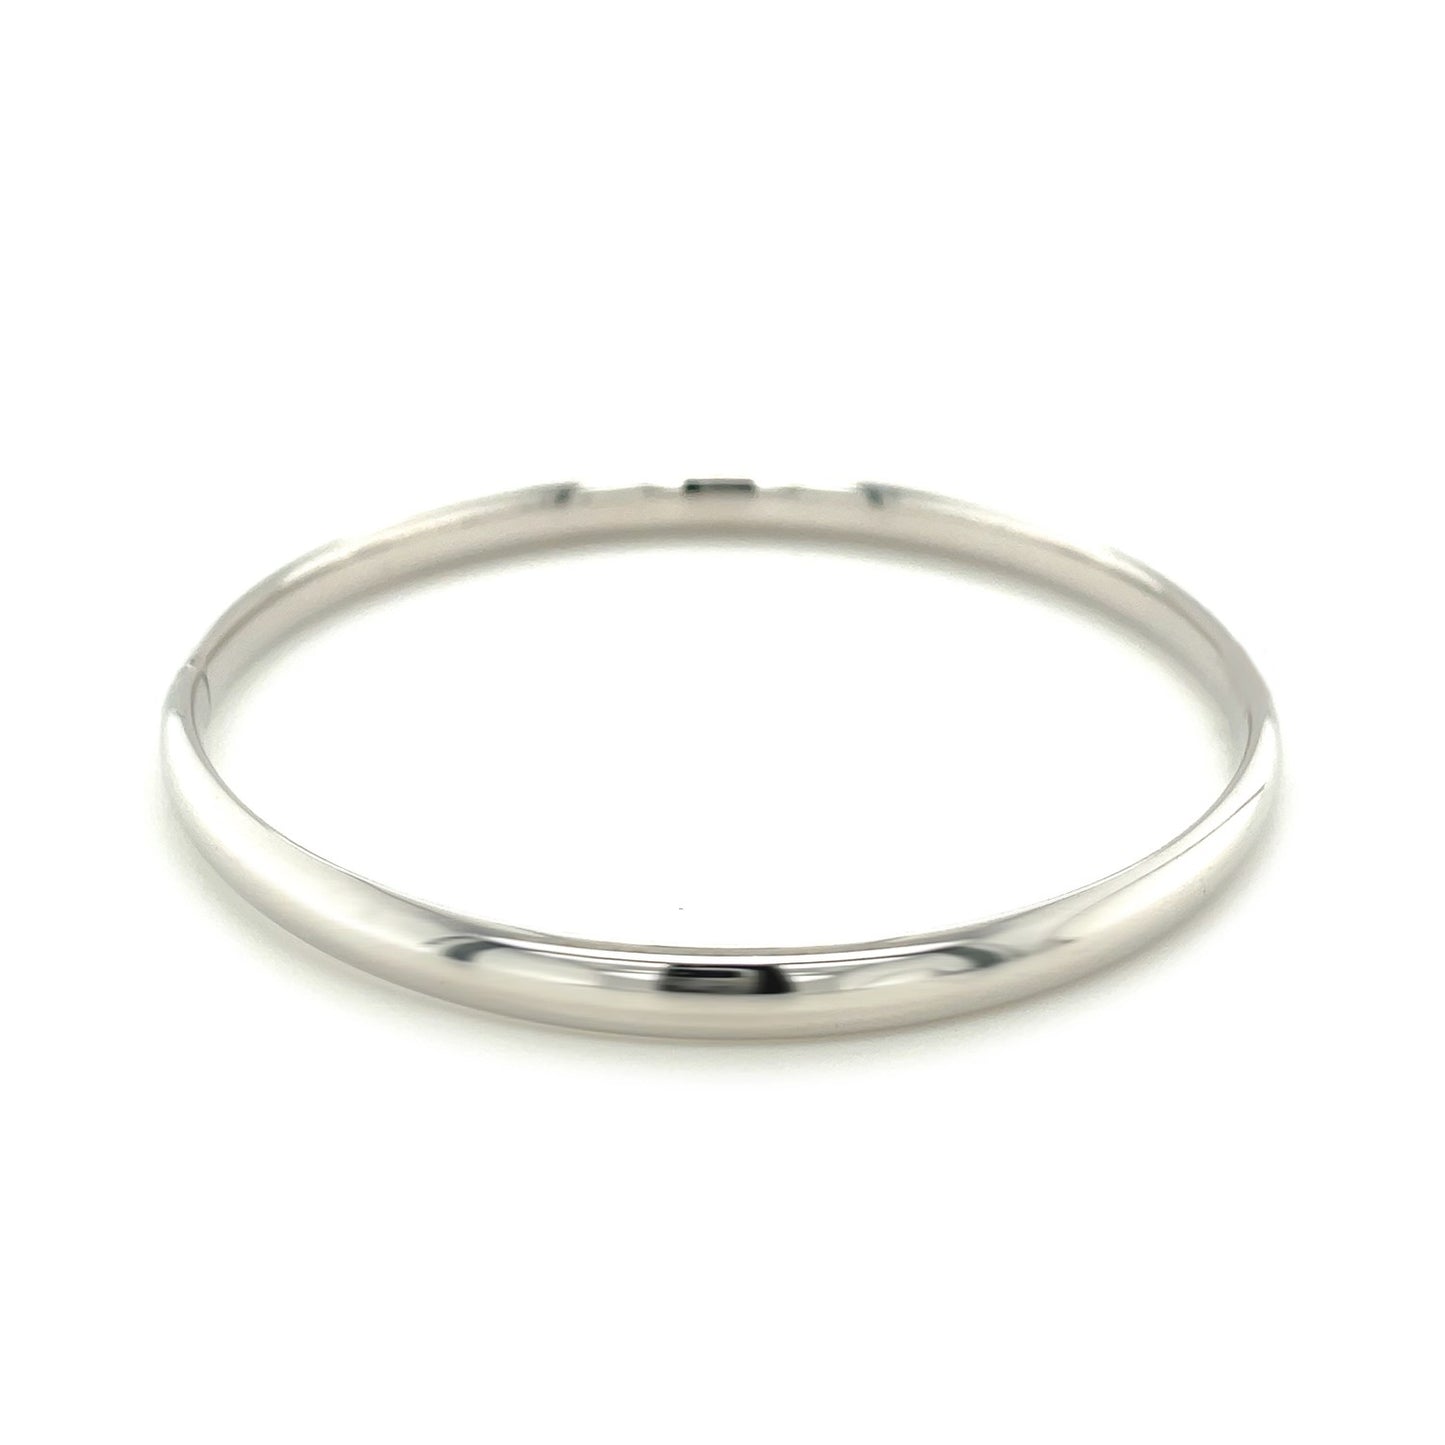 Classic Bangle in 14k White Gold (5.0mm)